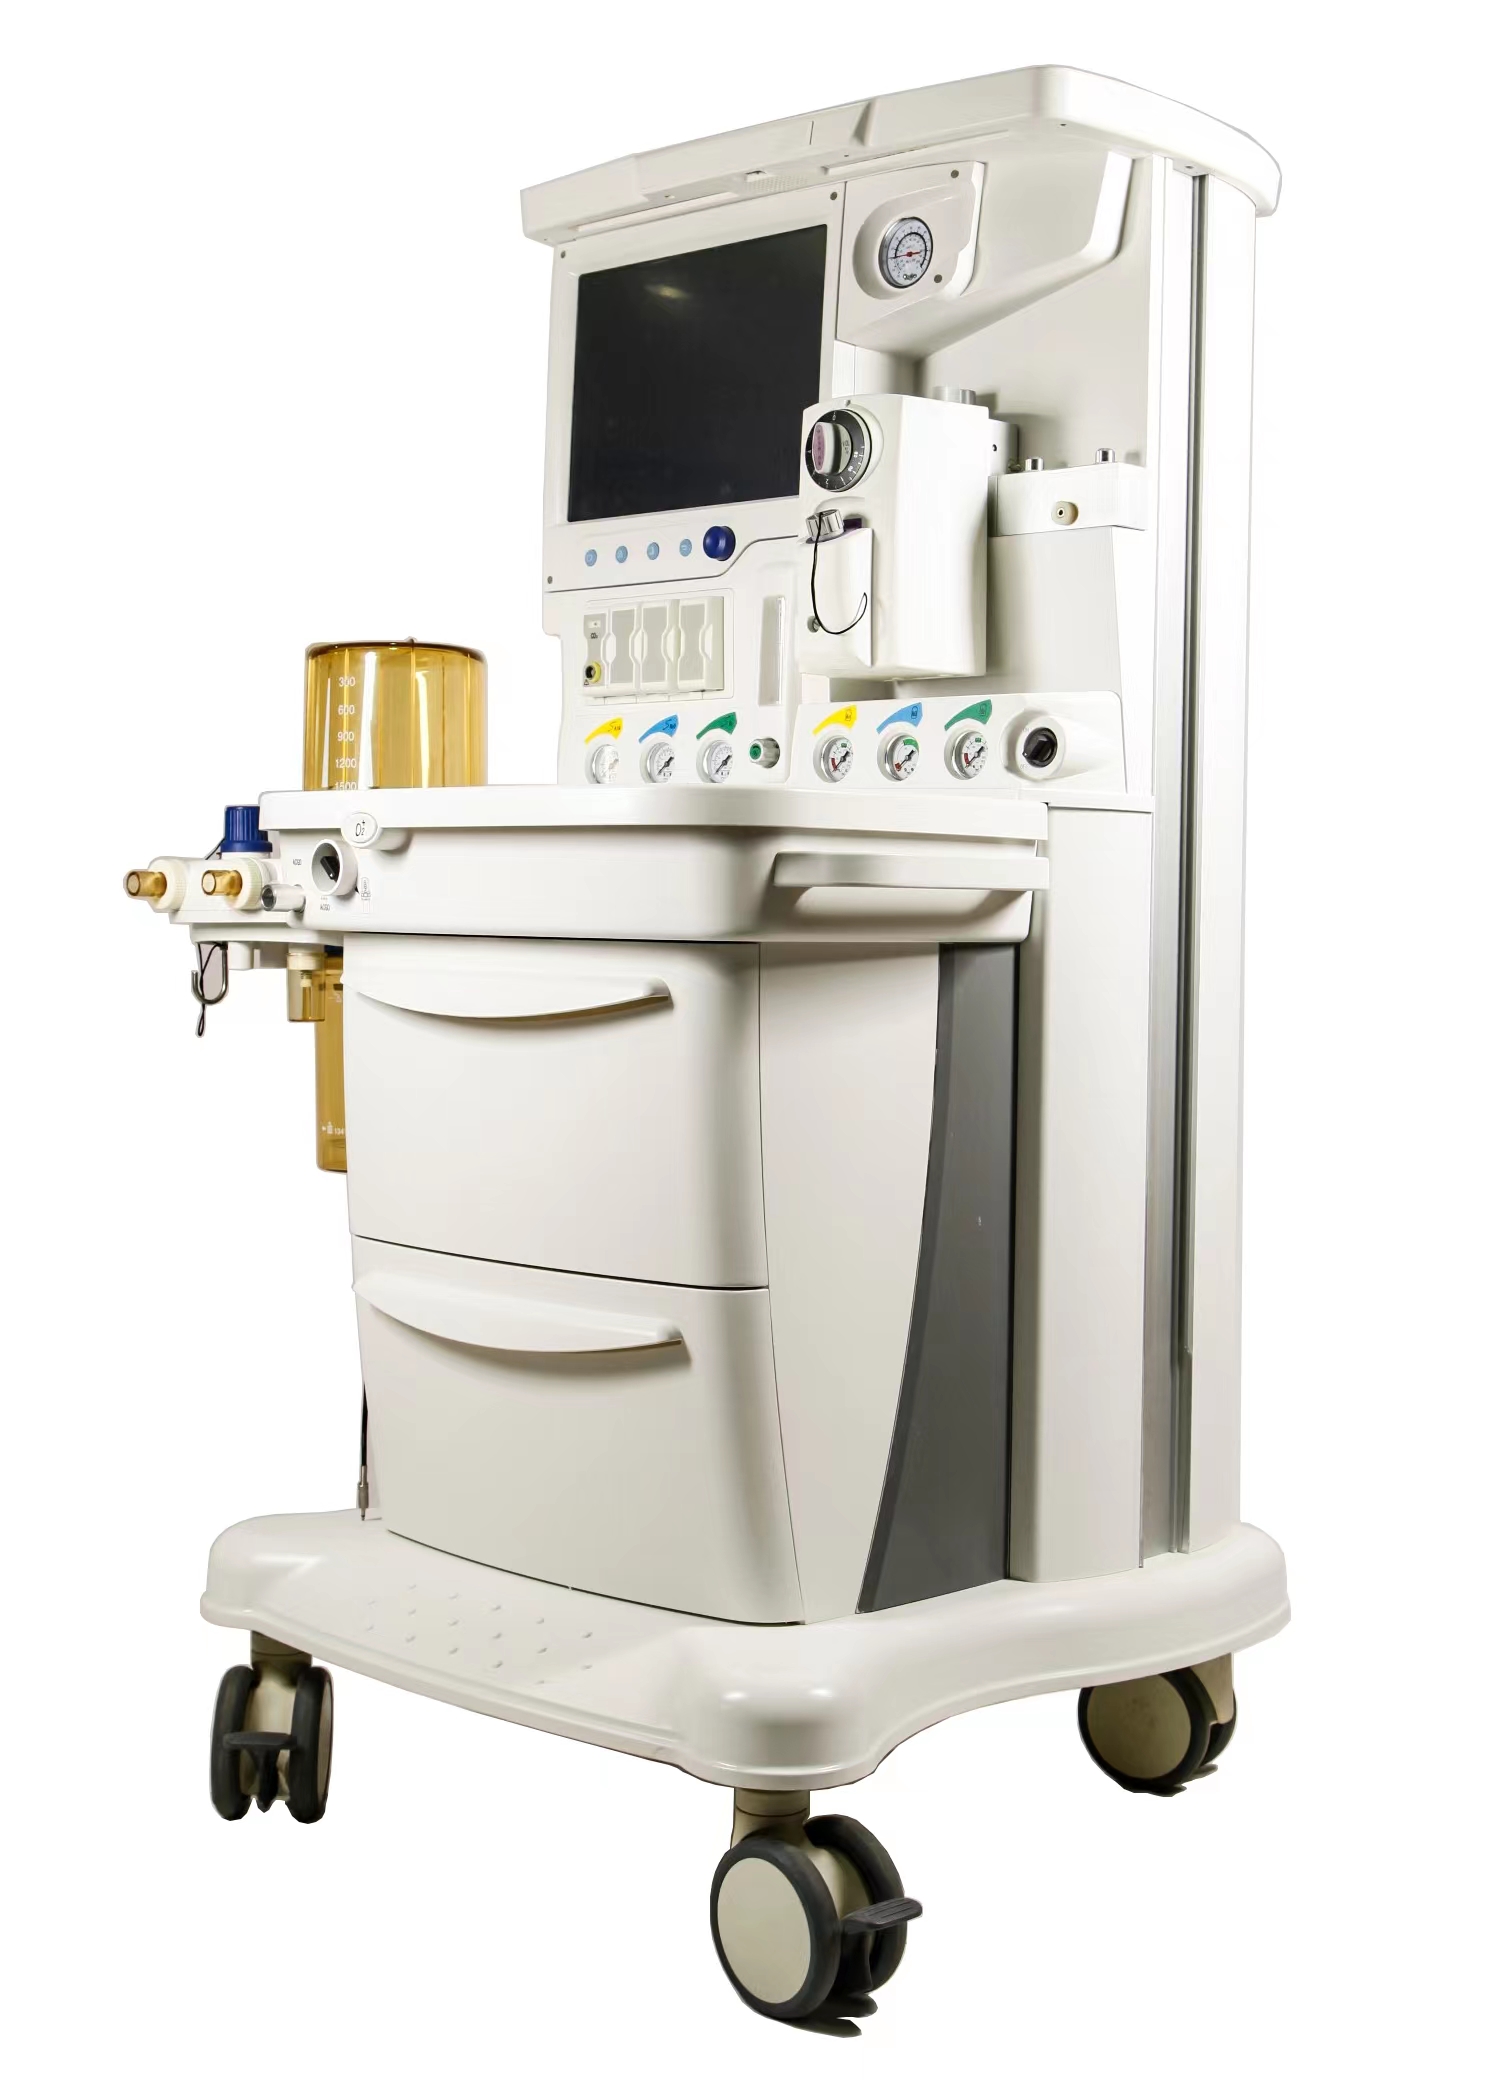 MS-M3300 Anesthesia System 